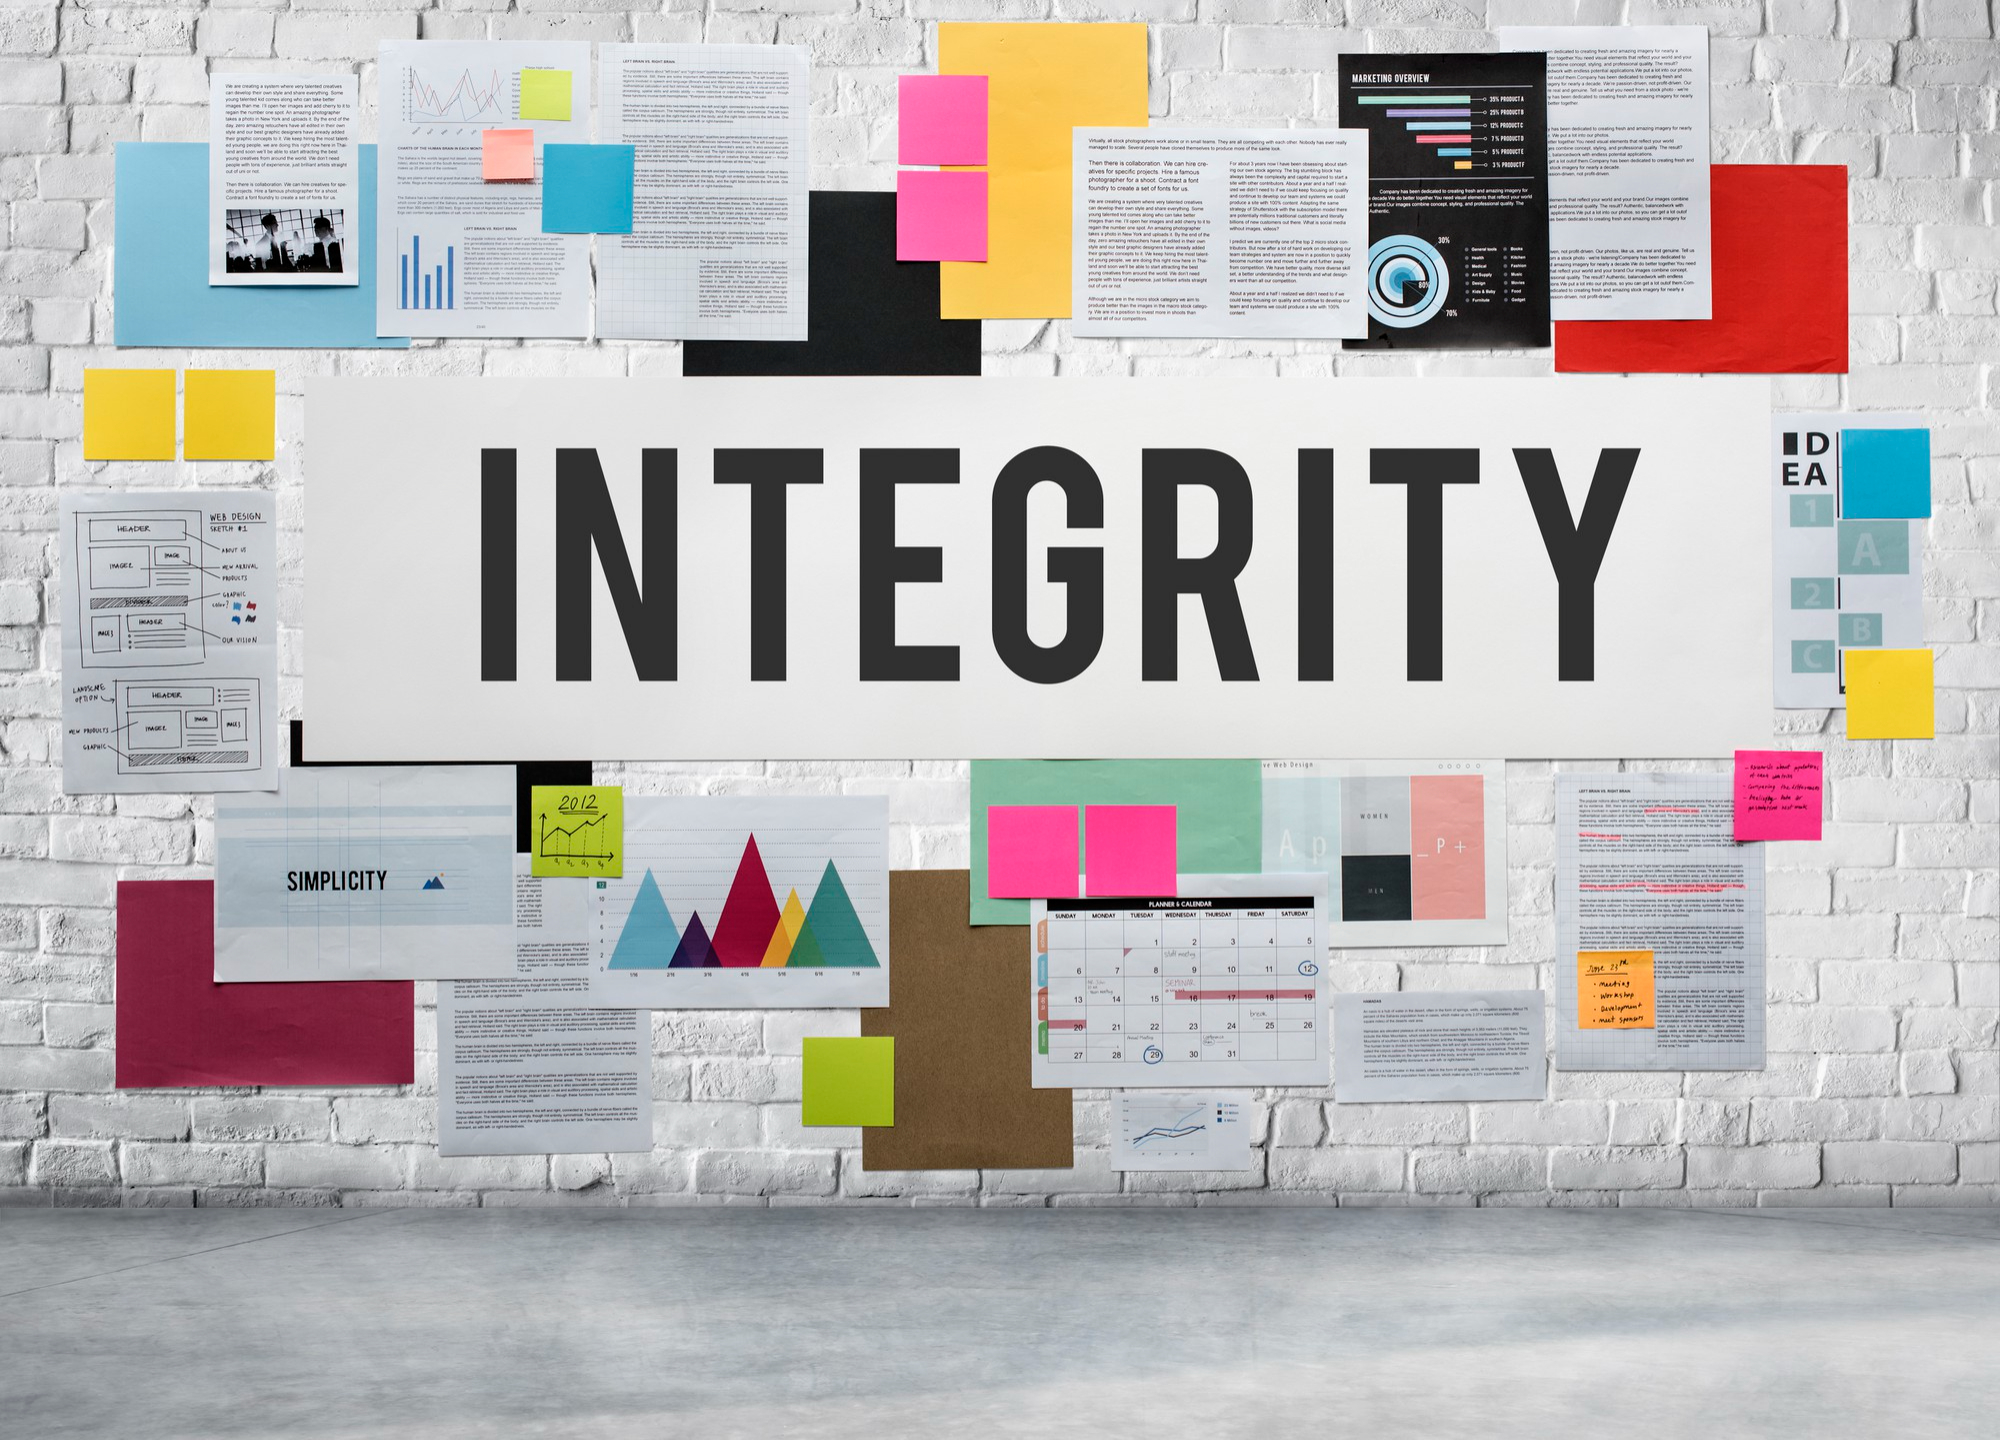 Notes and papers pasted on a brick wall with the word "Integrity" highlighted